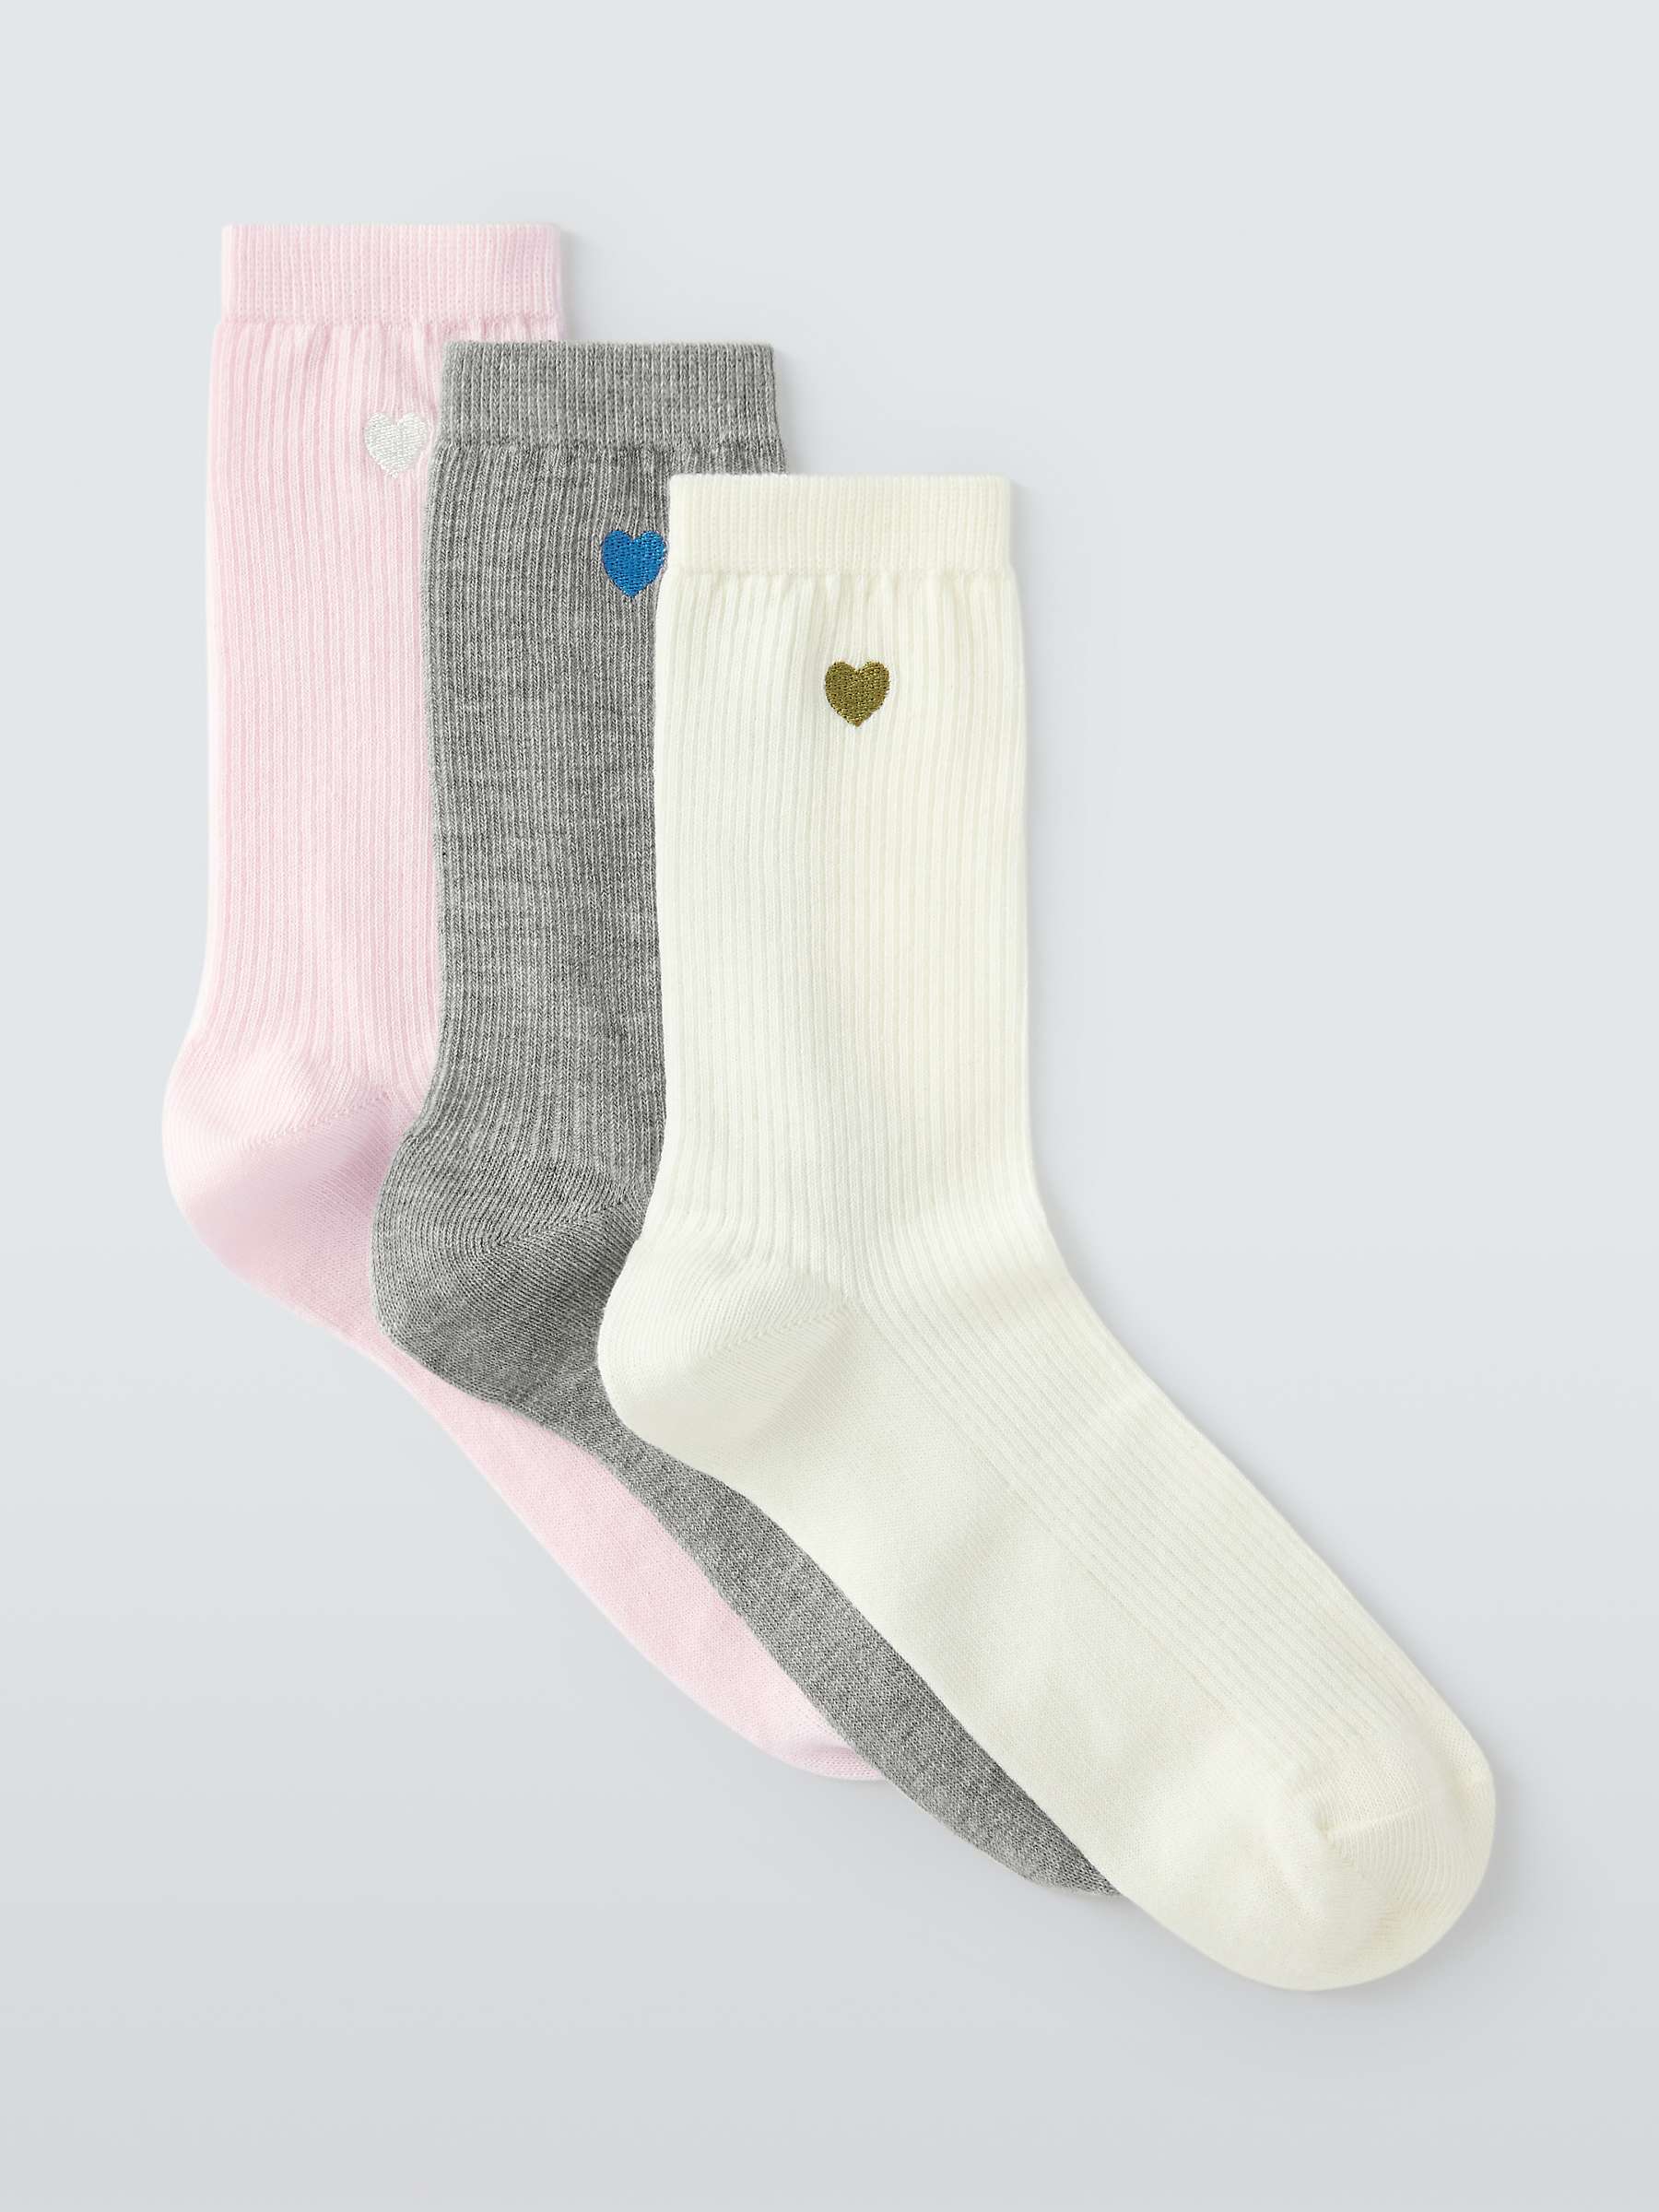 Buy John Lewis Embroidered Heart Ankle Socks, Pack of 3, Ivory/Pink Online at johnlewis.com